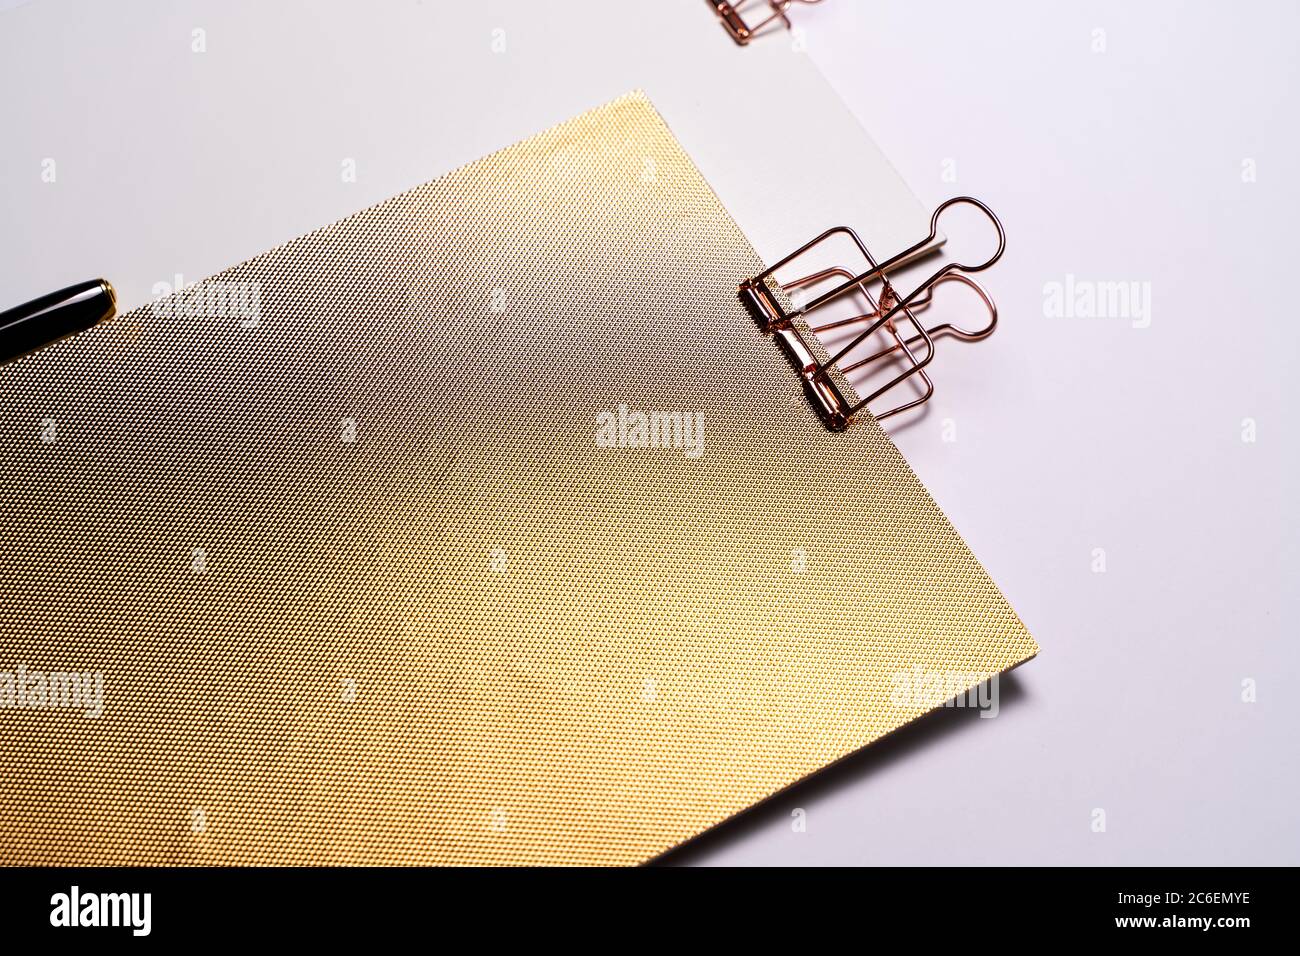 Two golden clipboard, branding stationery mockup and fountain pen on the cleared desk. Corporate modern items set, nobody Stock Photo